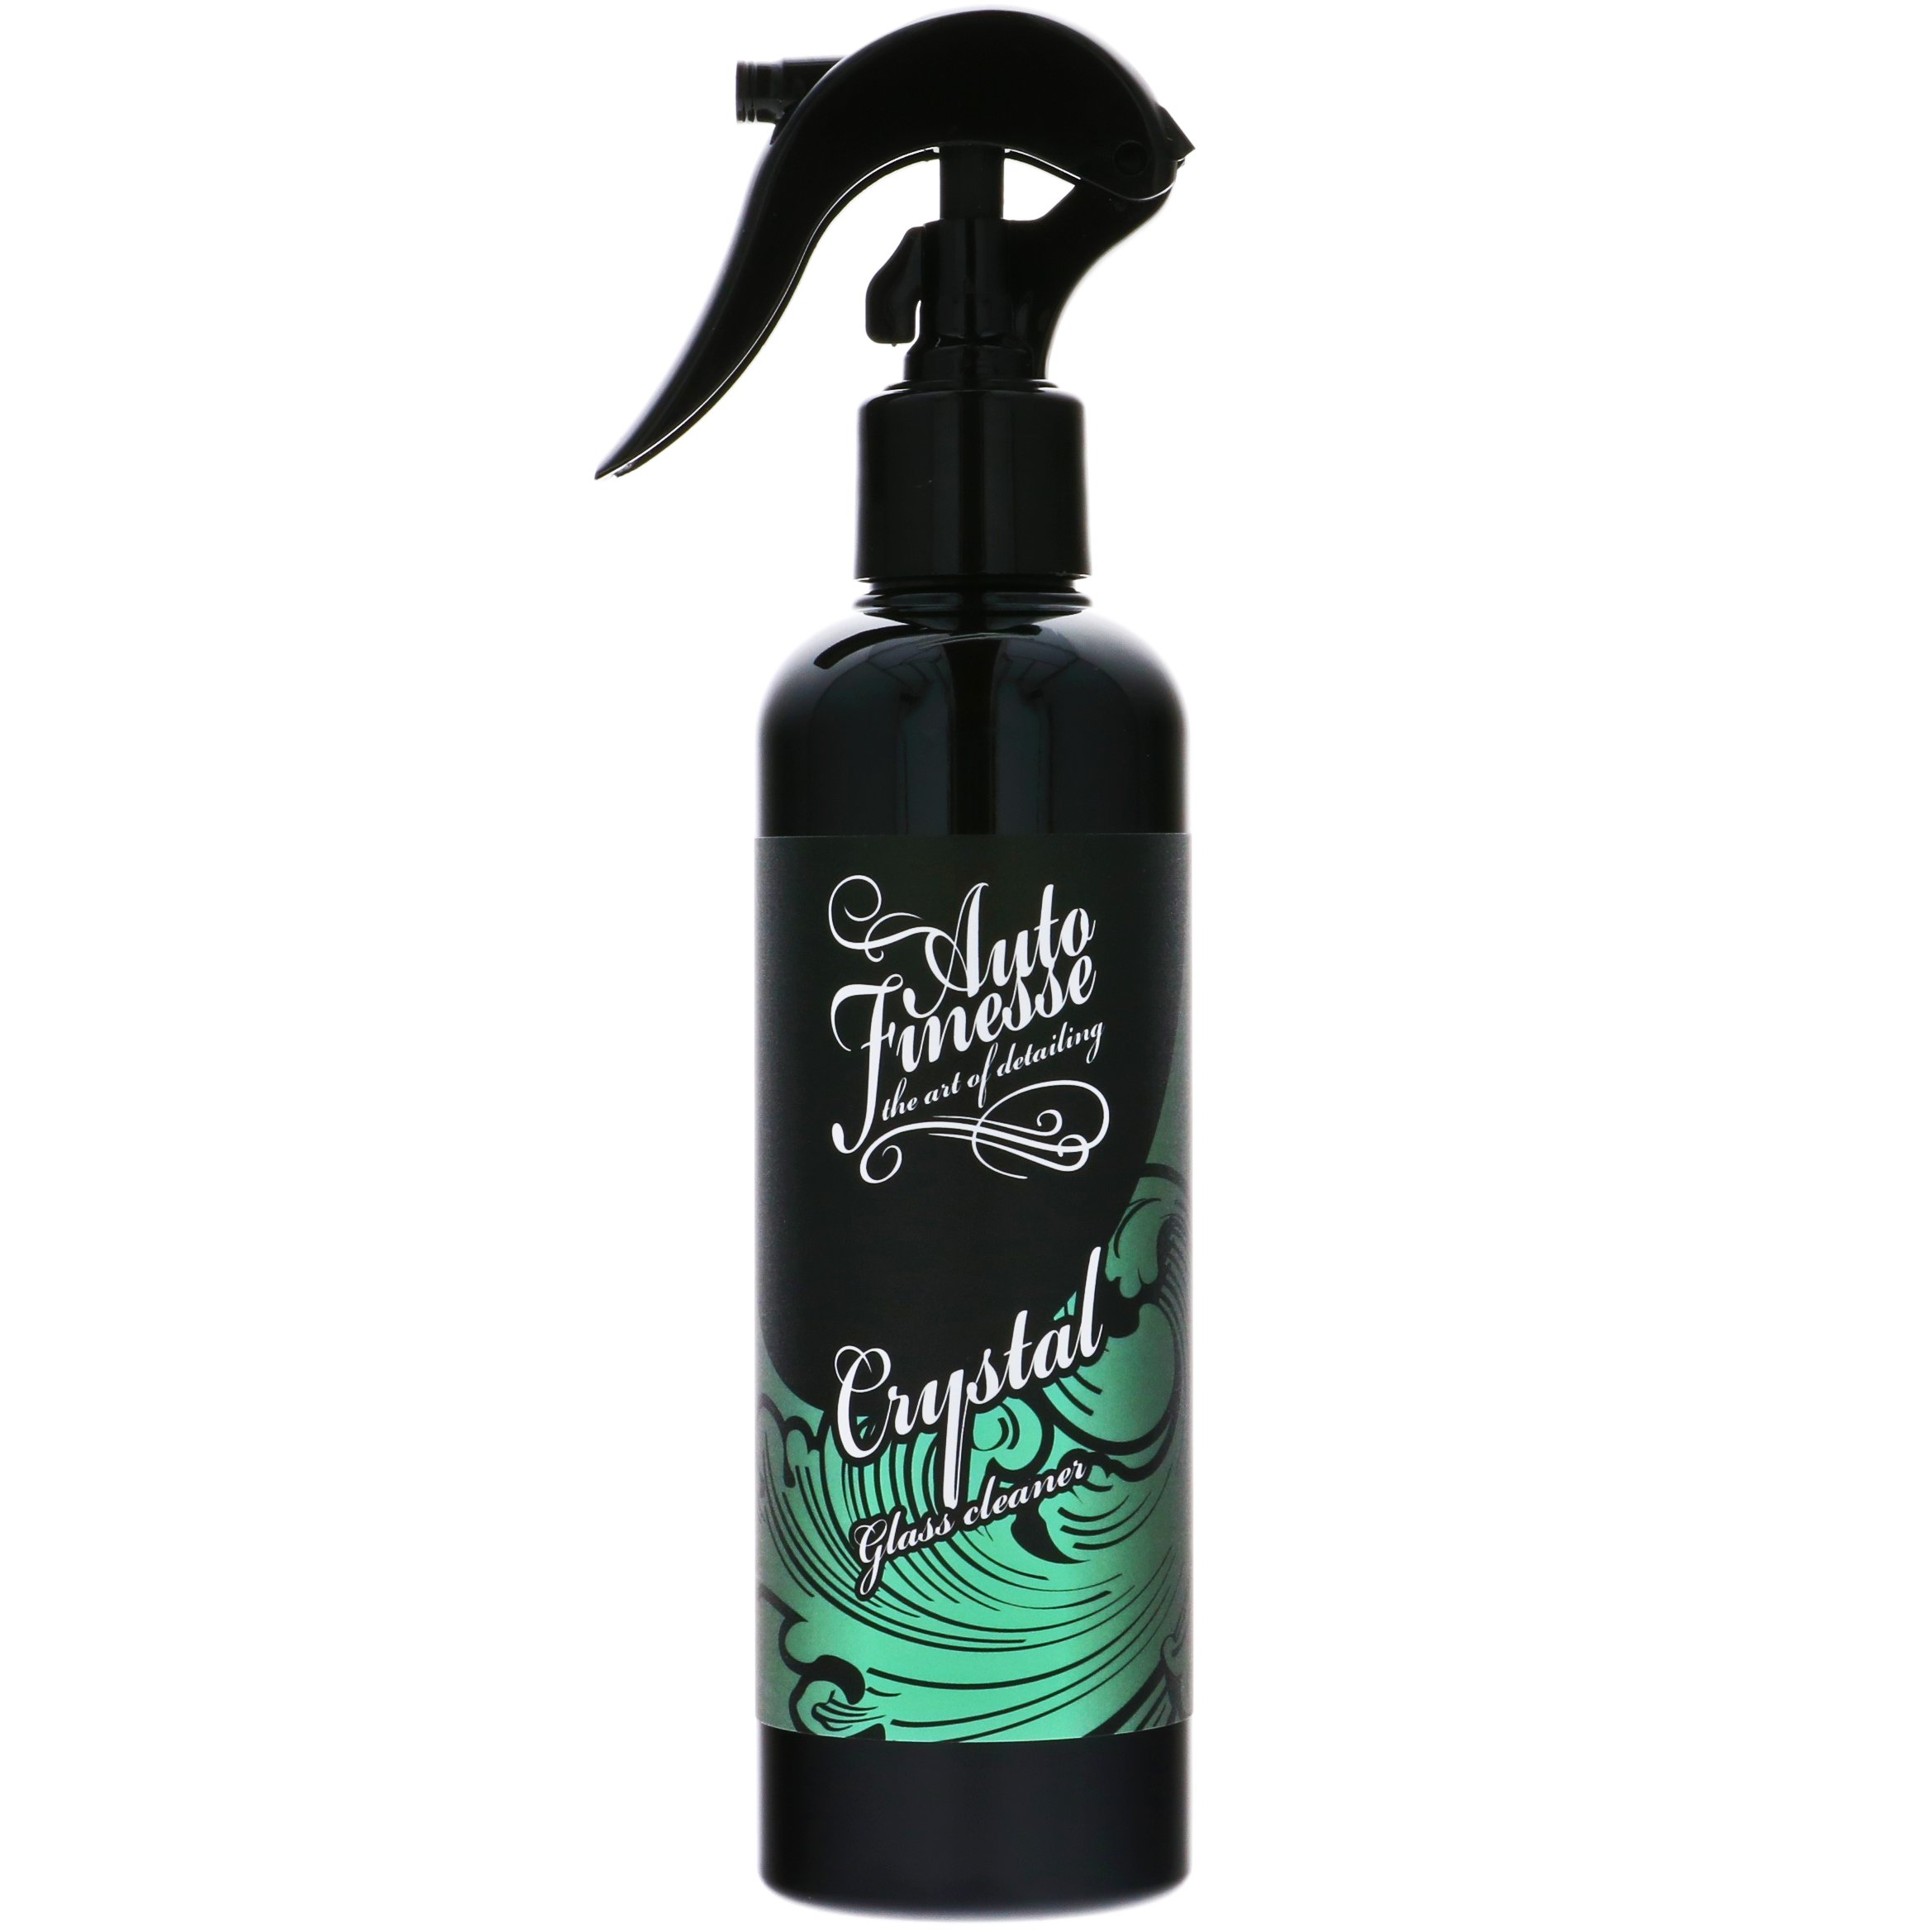 Crystal Glass Cleaner - 250ml